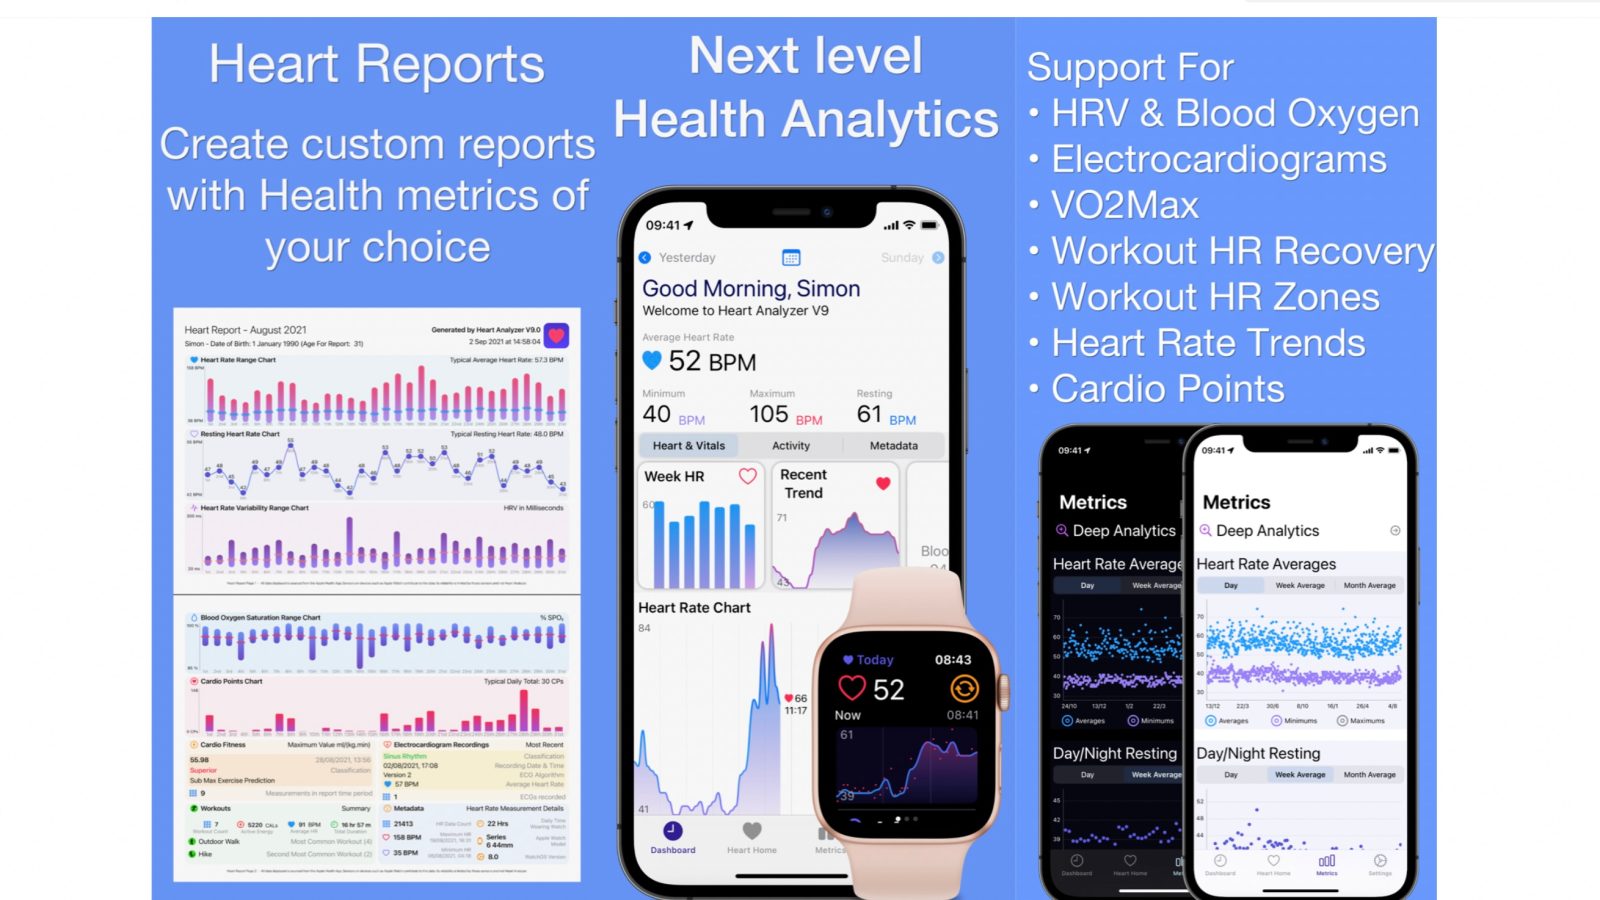 Apple health tech updates: AliveCor sues over Watch ECG, new blood pressure  monitoring patent and Fitness+ launch plans